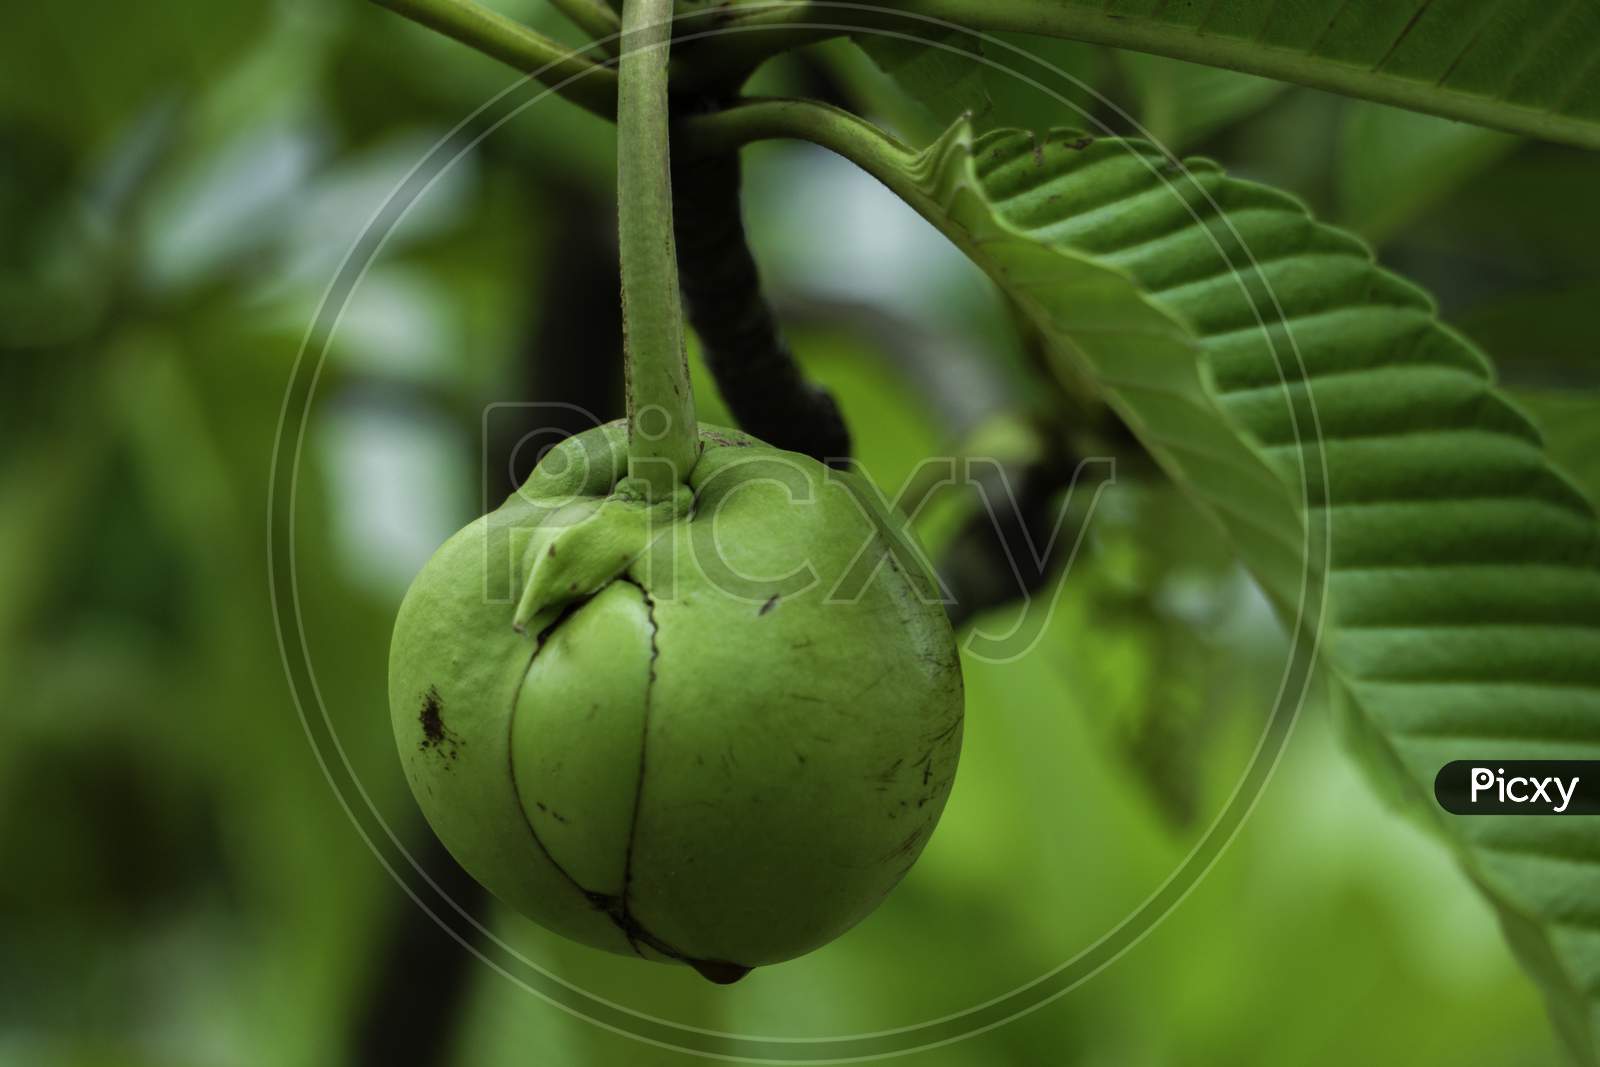 Chulta Tree Dillenia Indica, Elephant Apple On Tree Or Chalta Of South East Asia Dillenia Indica